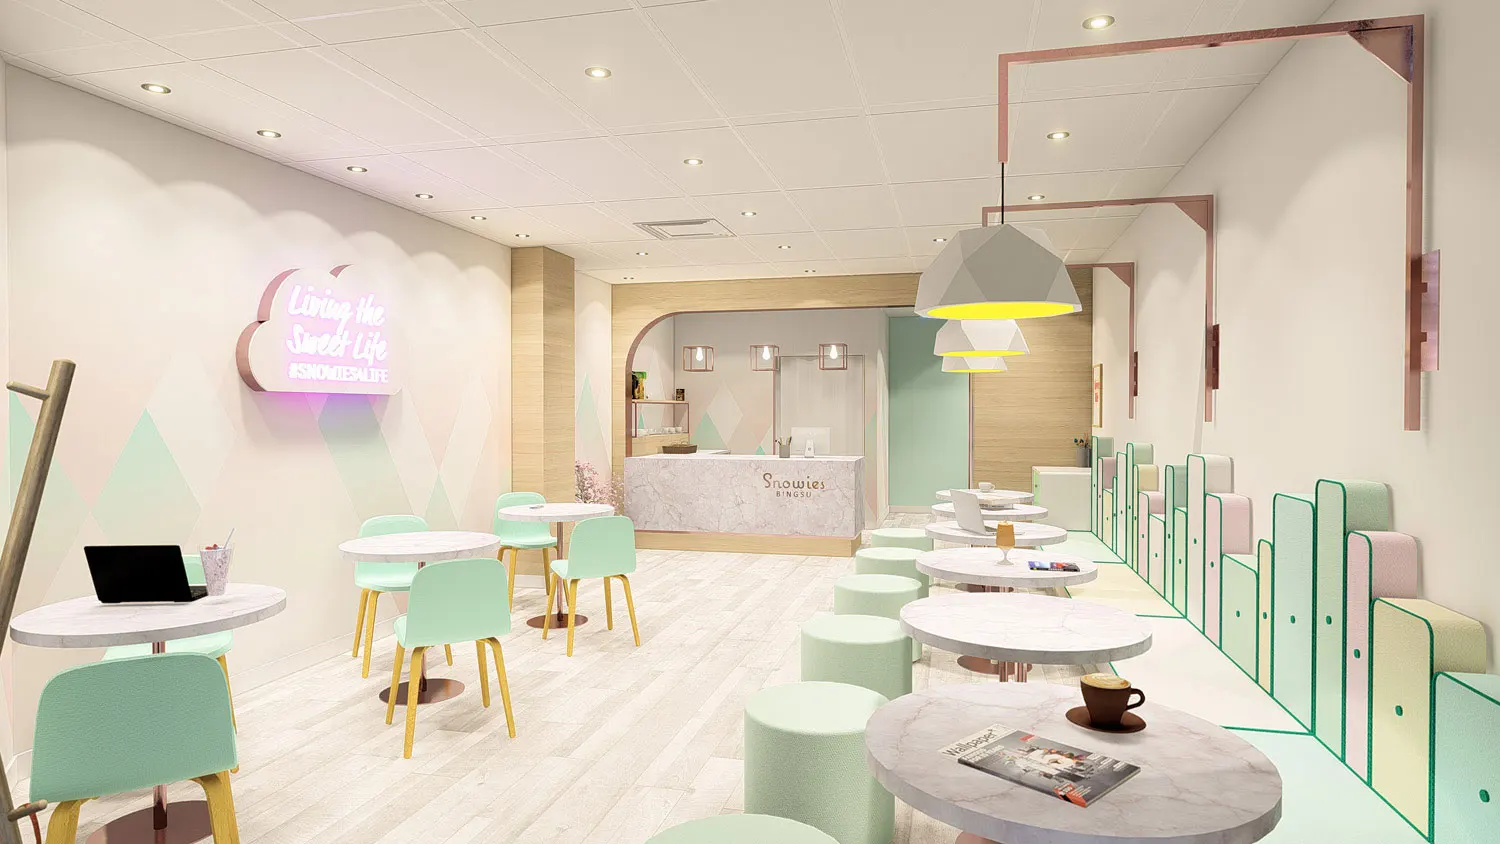 Interior design project for Snowies. Designed 3D rendering